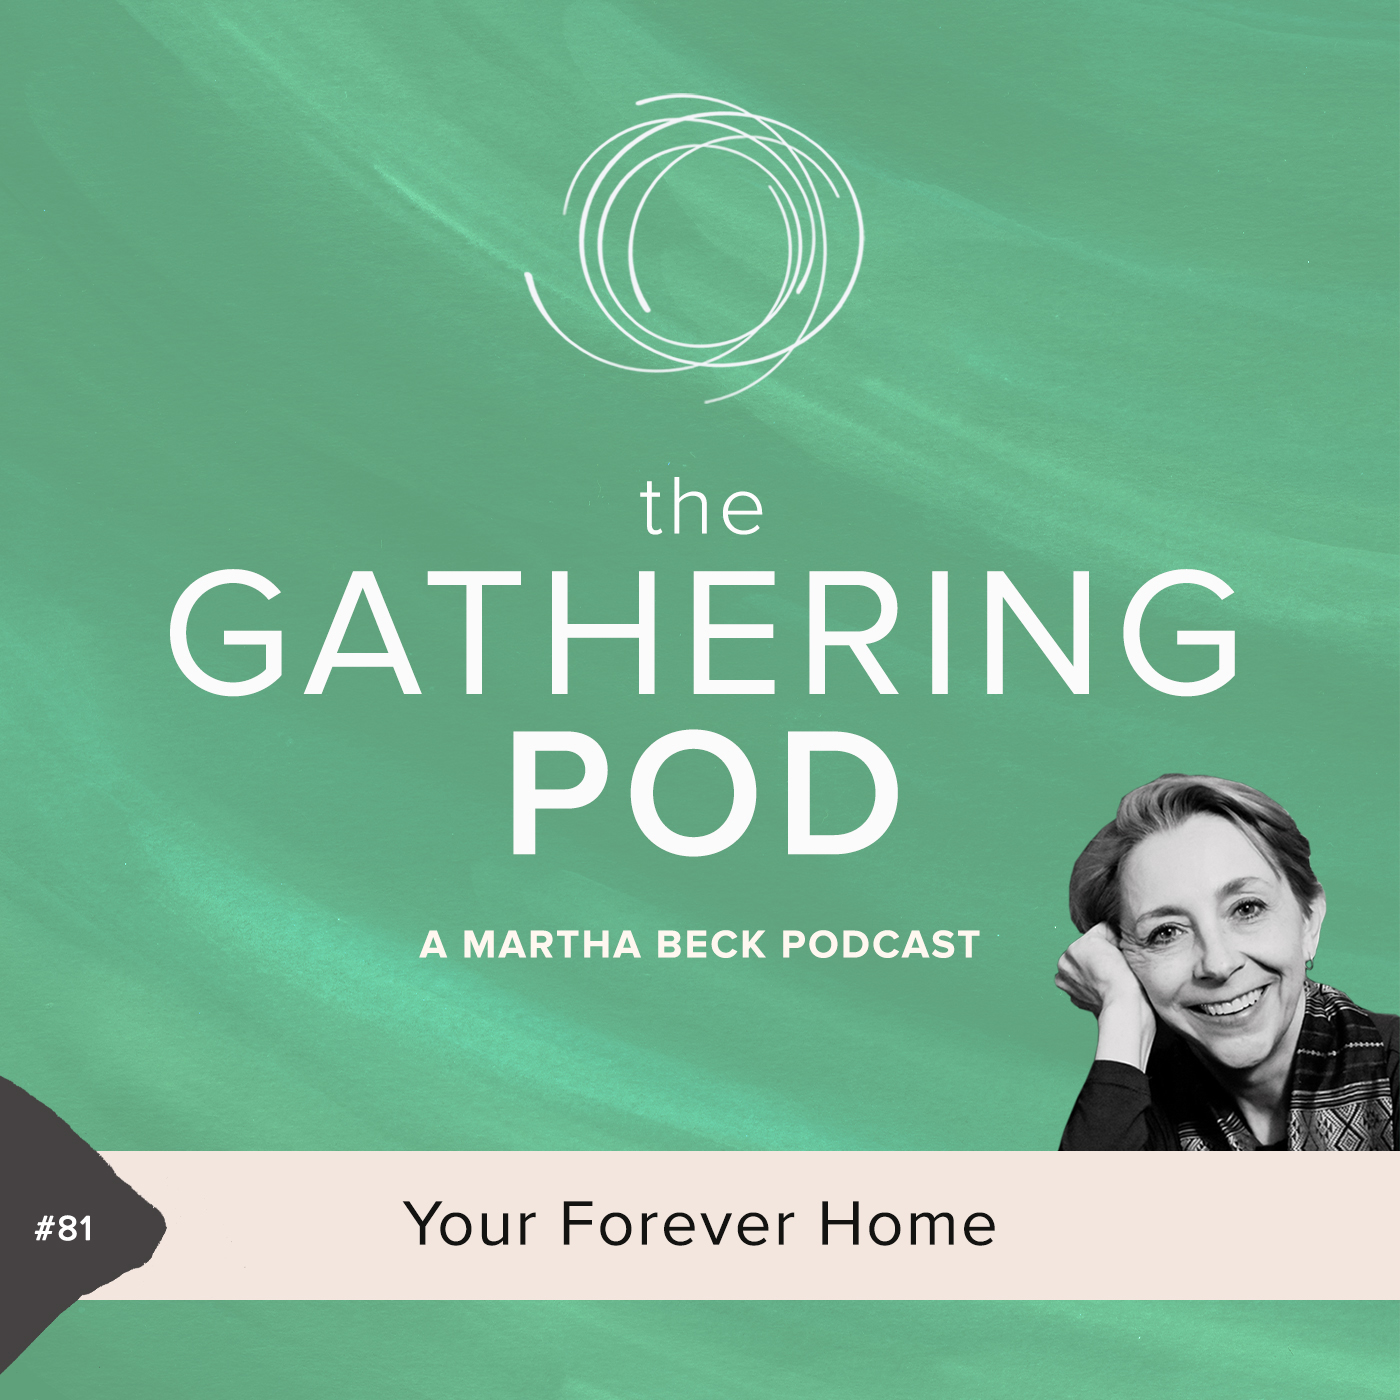 Image for The Gathering Pod A Martha Beck Podcast Episode #81 Your Forever Home